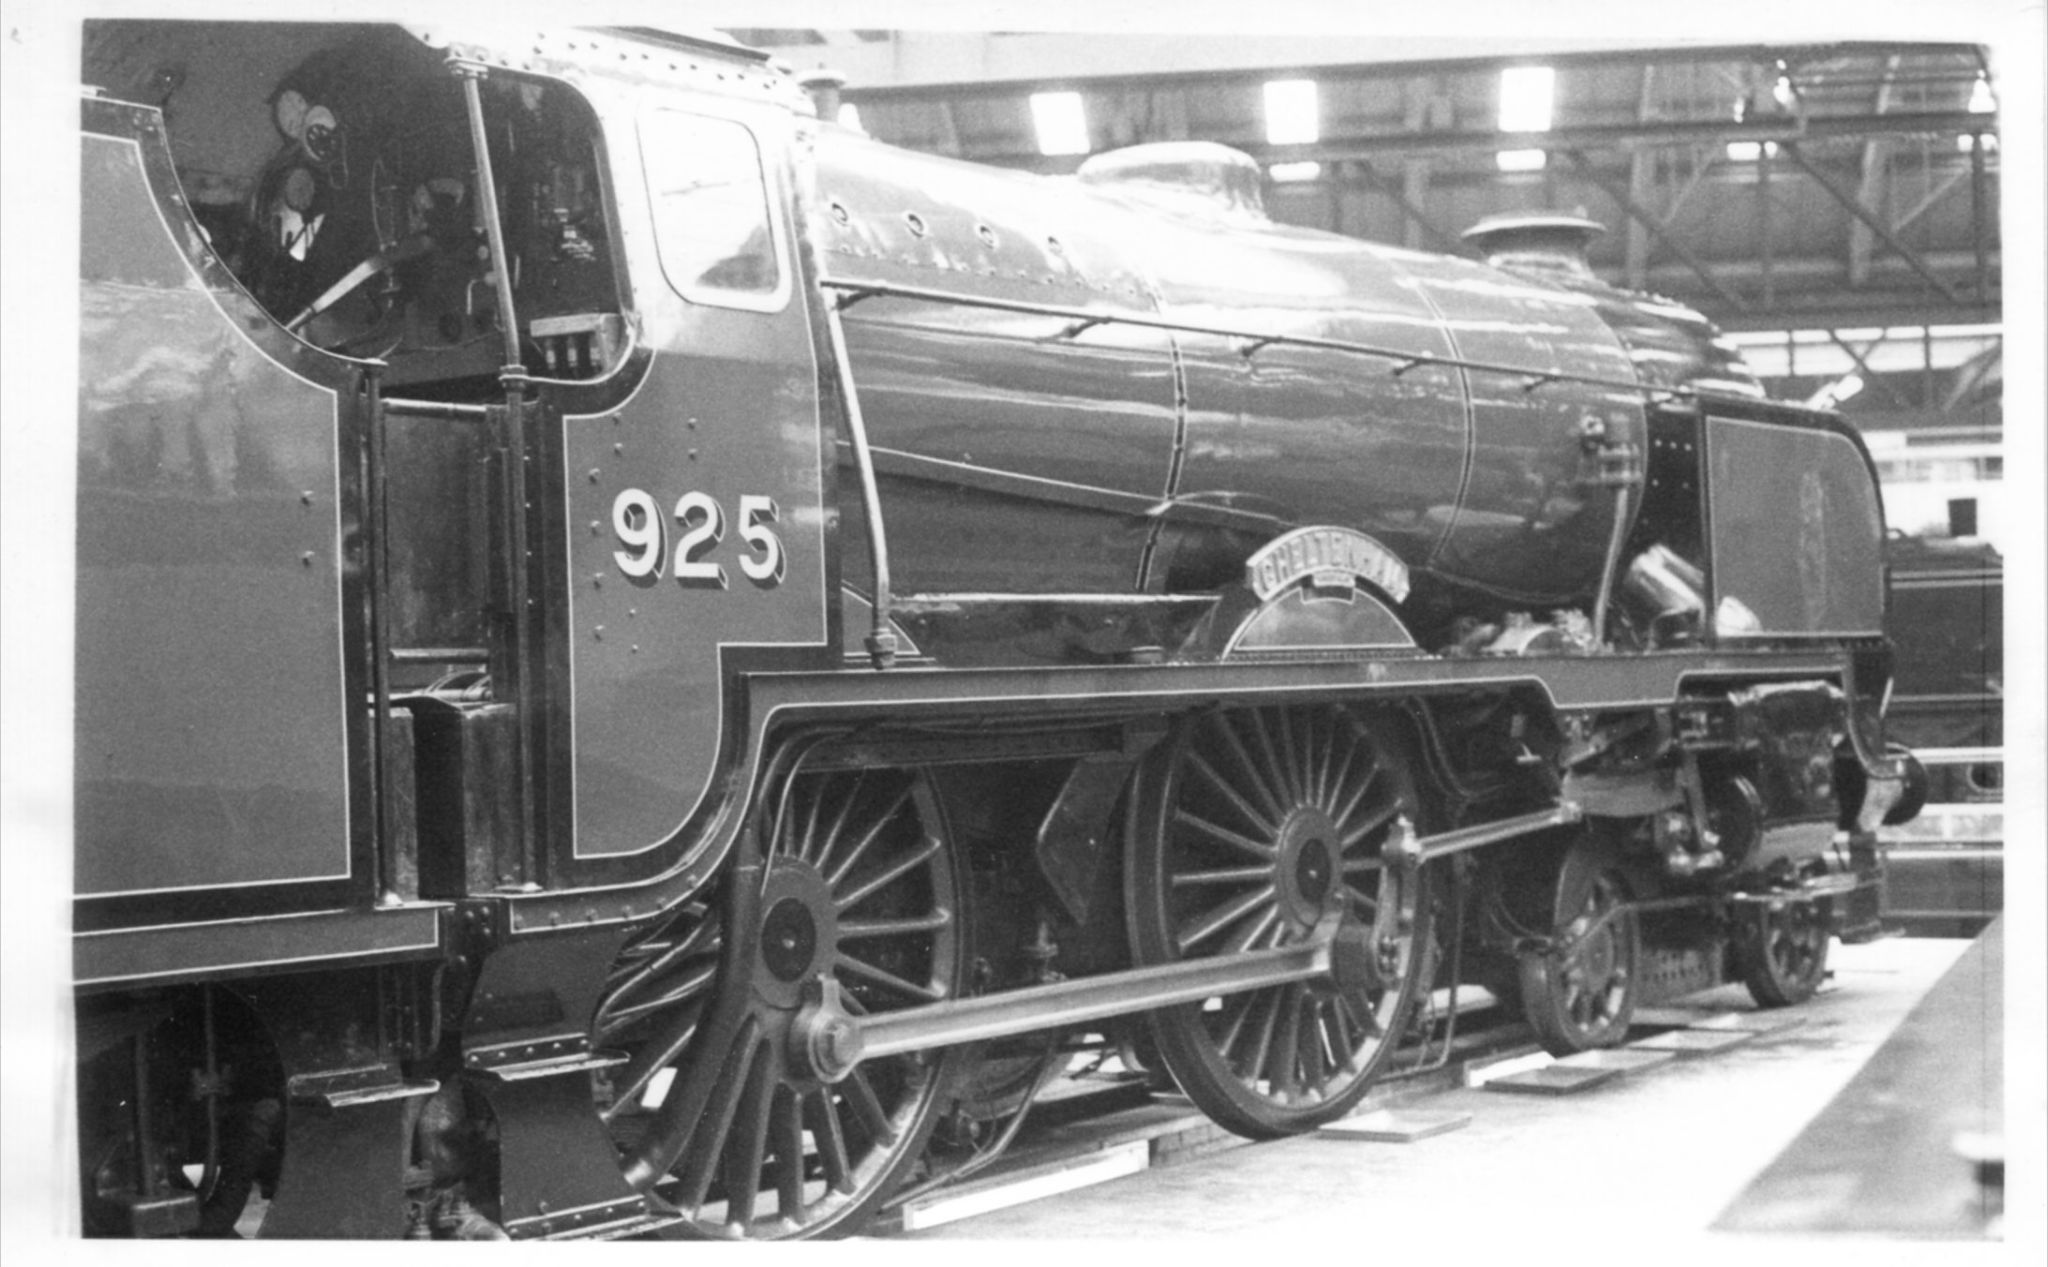 925 positioned at the turntable in the Great Hall of the National Railway Museum, York, on 31st March 1981. This was the sixth year of the new NRM at York. Roger Darsley